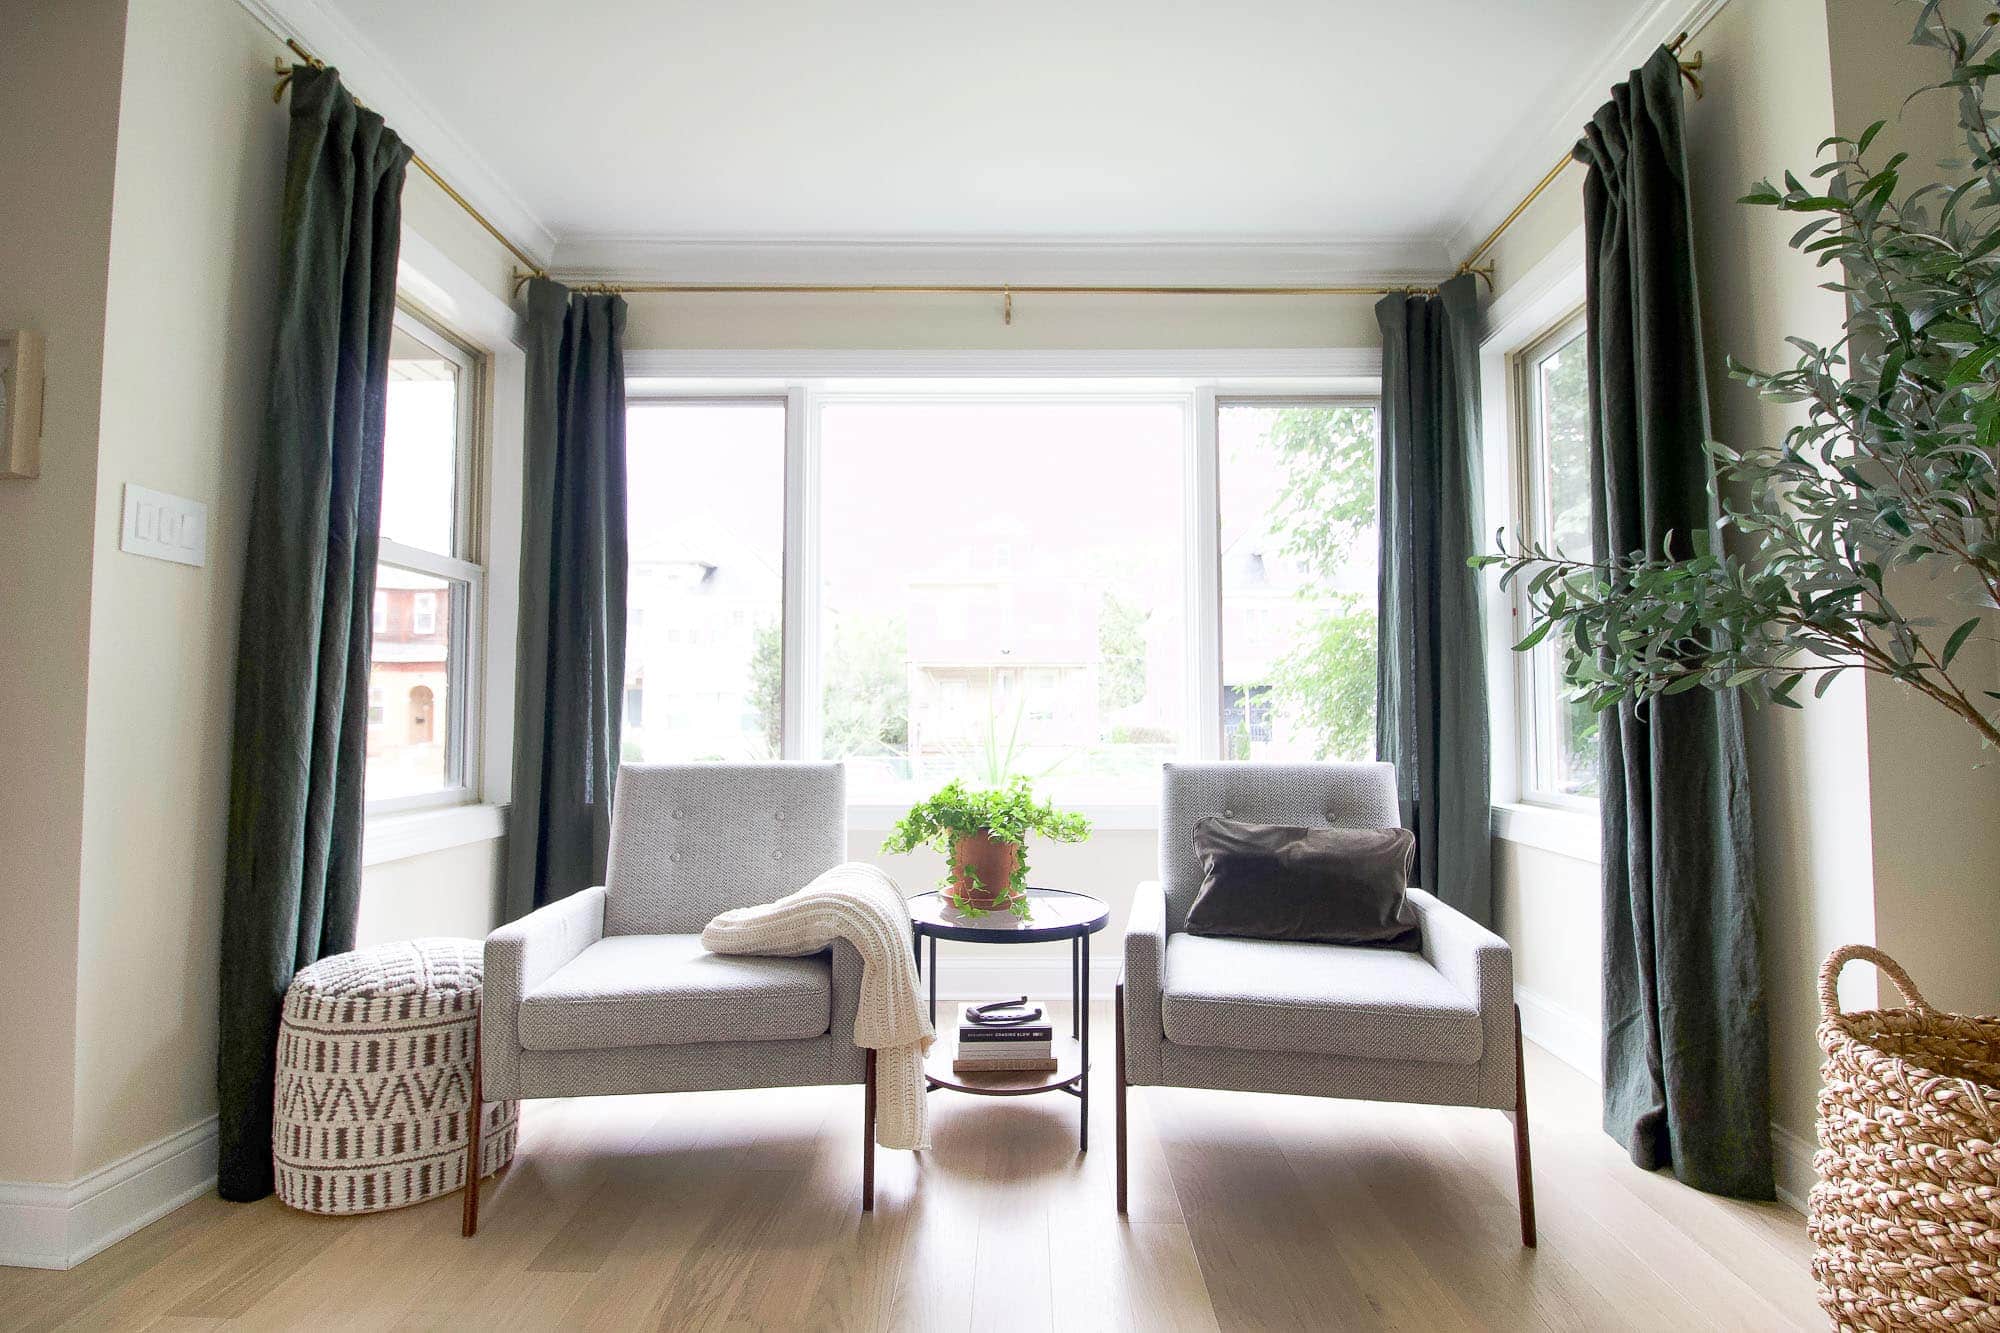 How to choose window treatments for your home